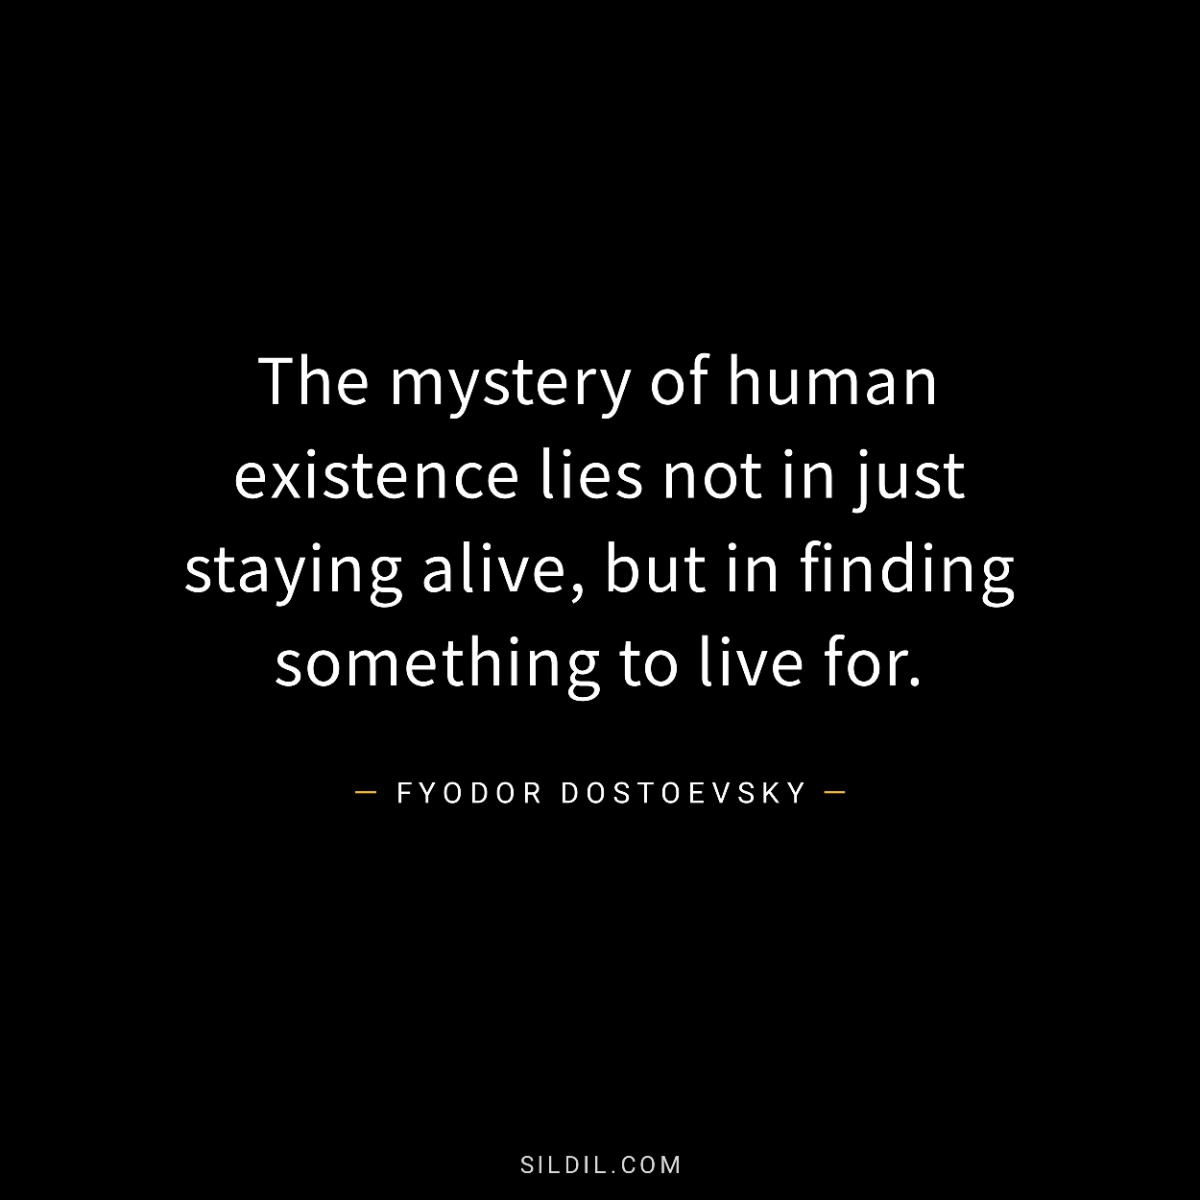 The mystery of human existence lies not in just staying alive, but in finding something to live for.